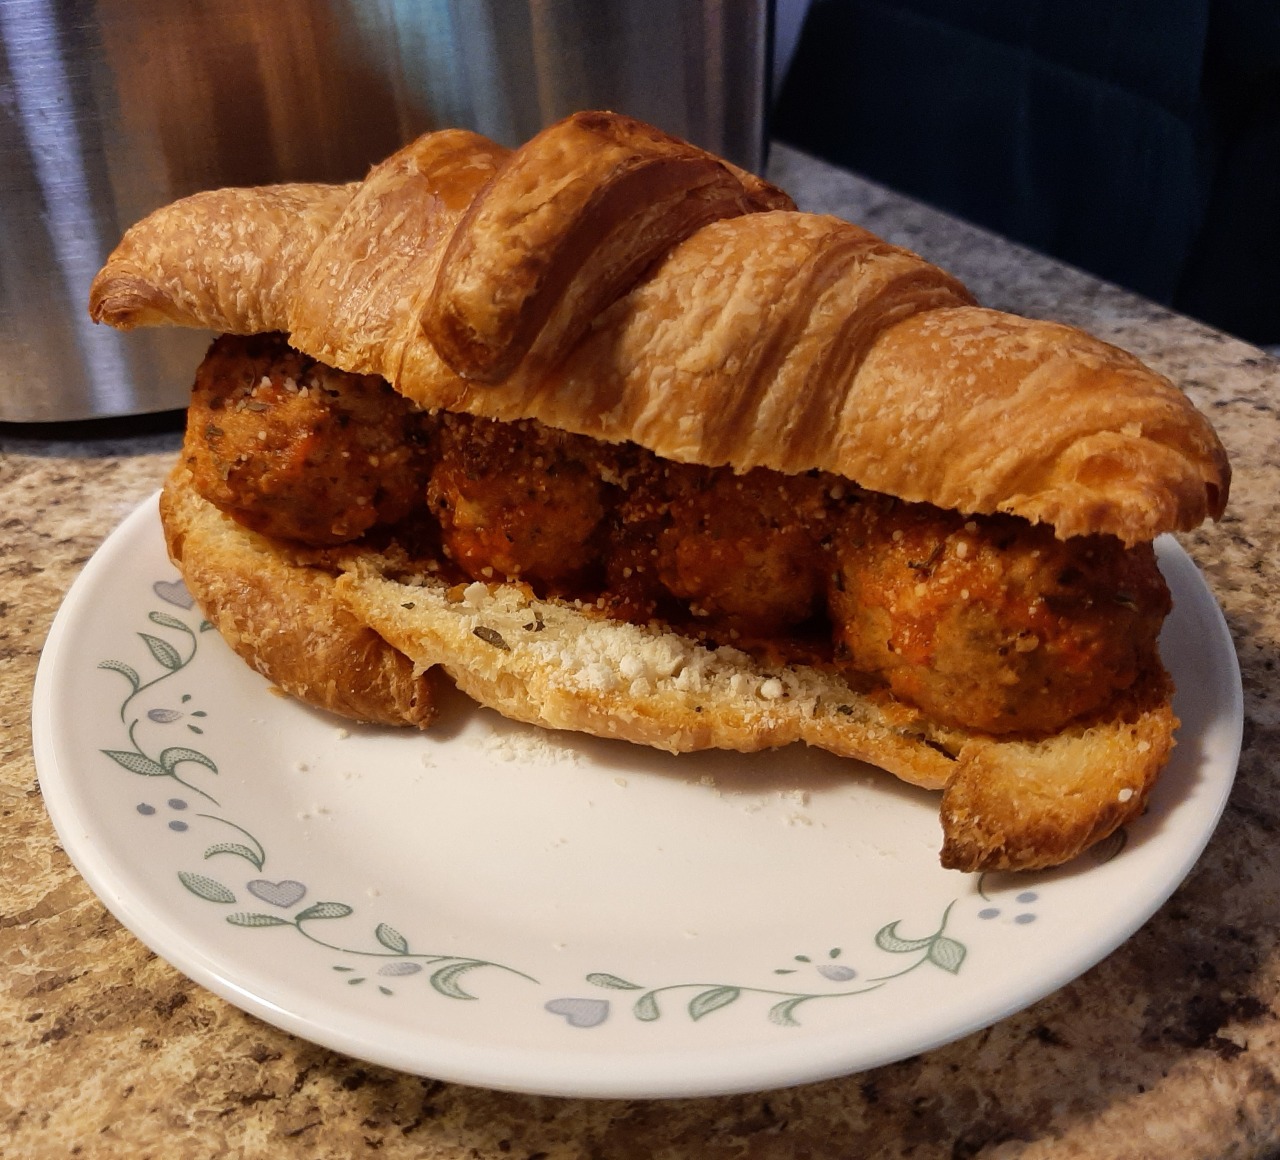 meatball sandwich on a buttery toasted croissant #food#sandwich#croissant#pastry#butter#olive oil#sea salt#tomato sauce#tomato puree#tomato#garlic#basil#parmesan#cheese#meatball#beef#pork#meat#spring#may